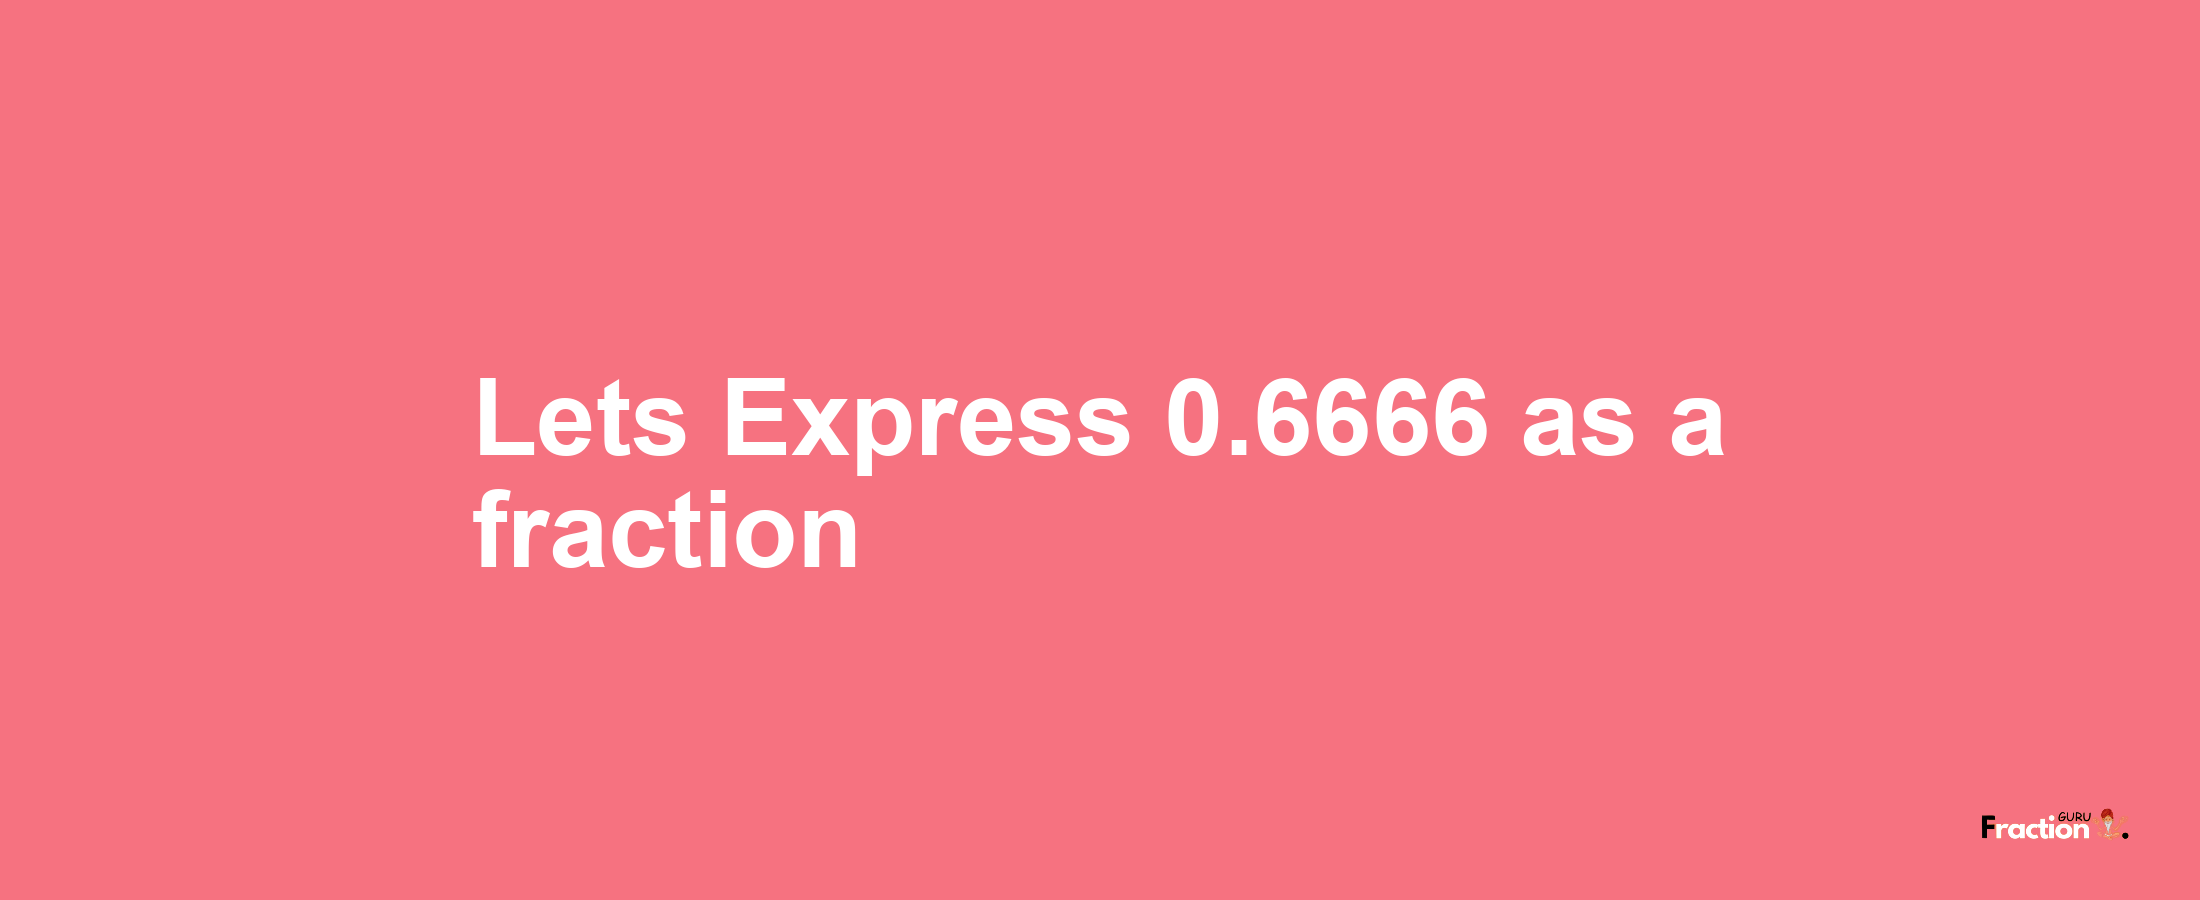 Lets Express 0.6666 as afraction